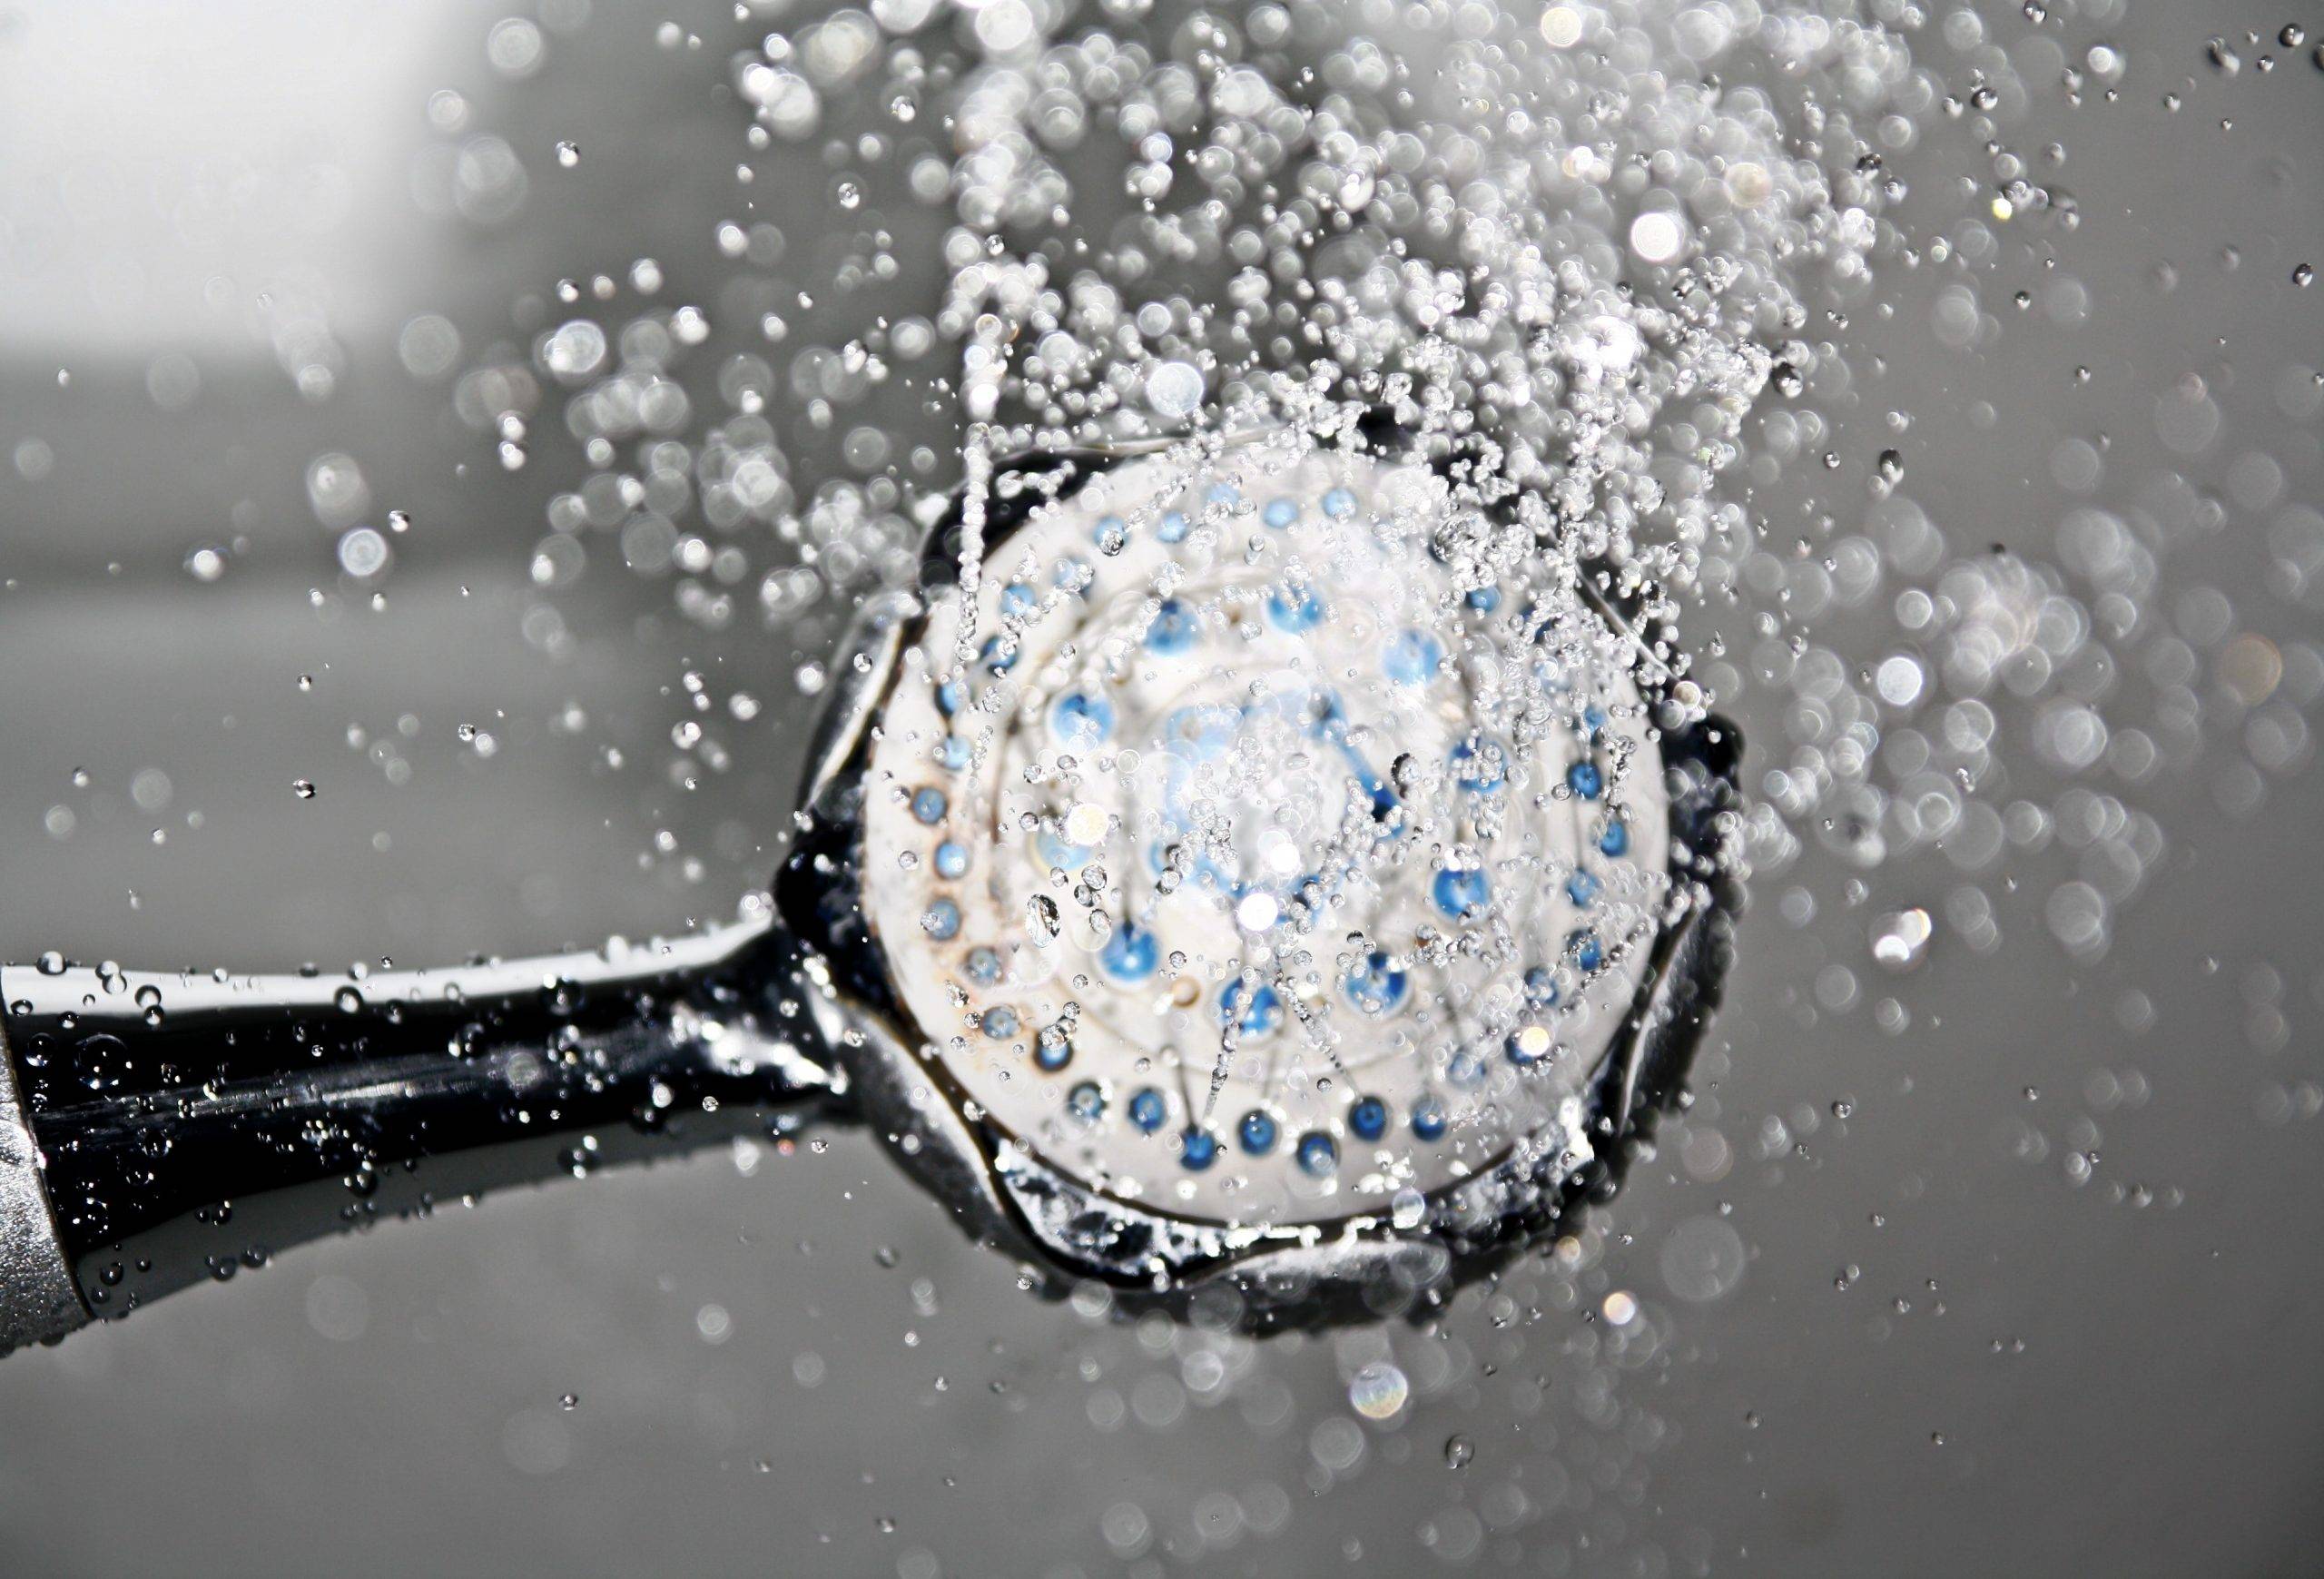 Water coming out of shower head